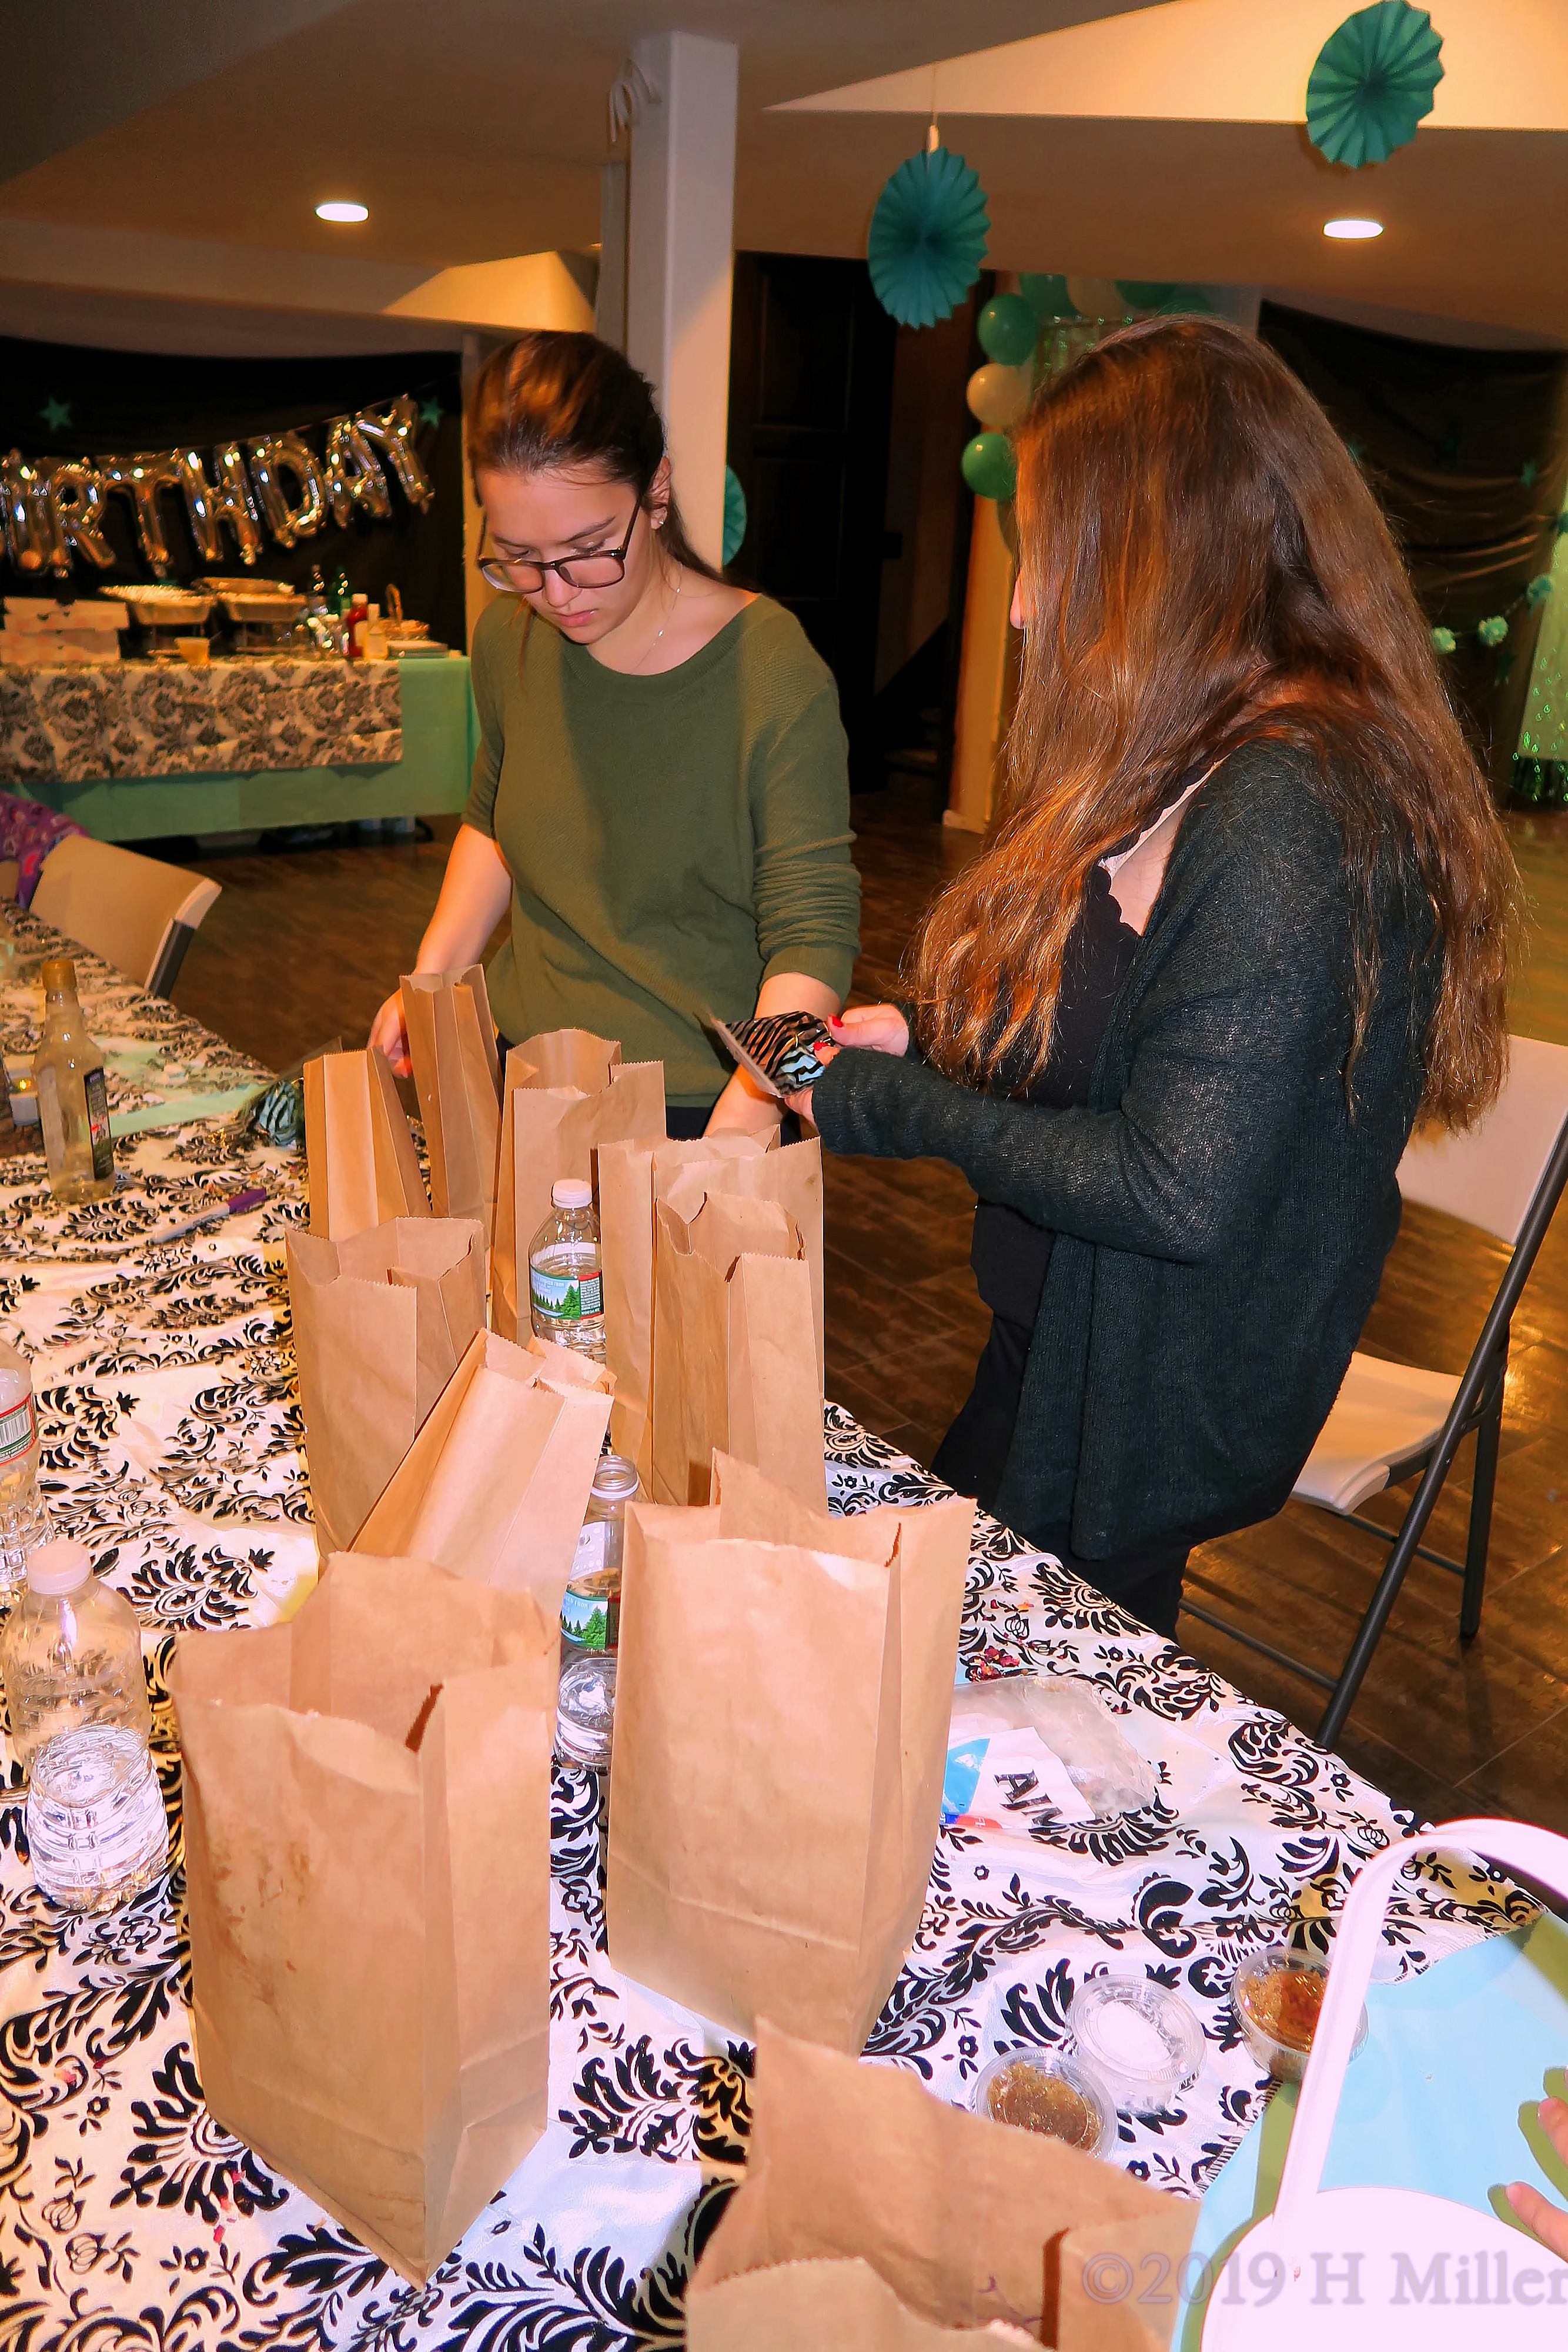 Making Memories! Kids Craft Goodie Bags For Party Guests! 4